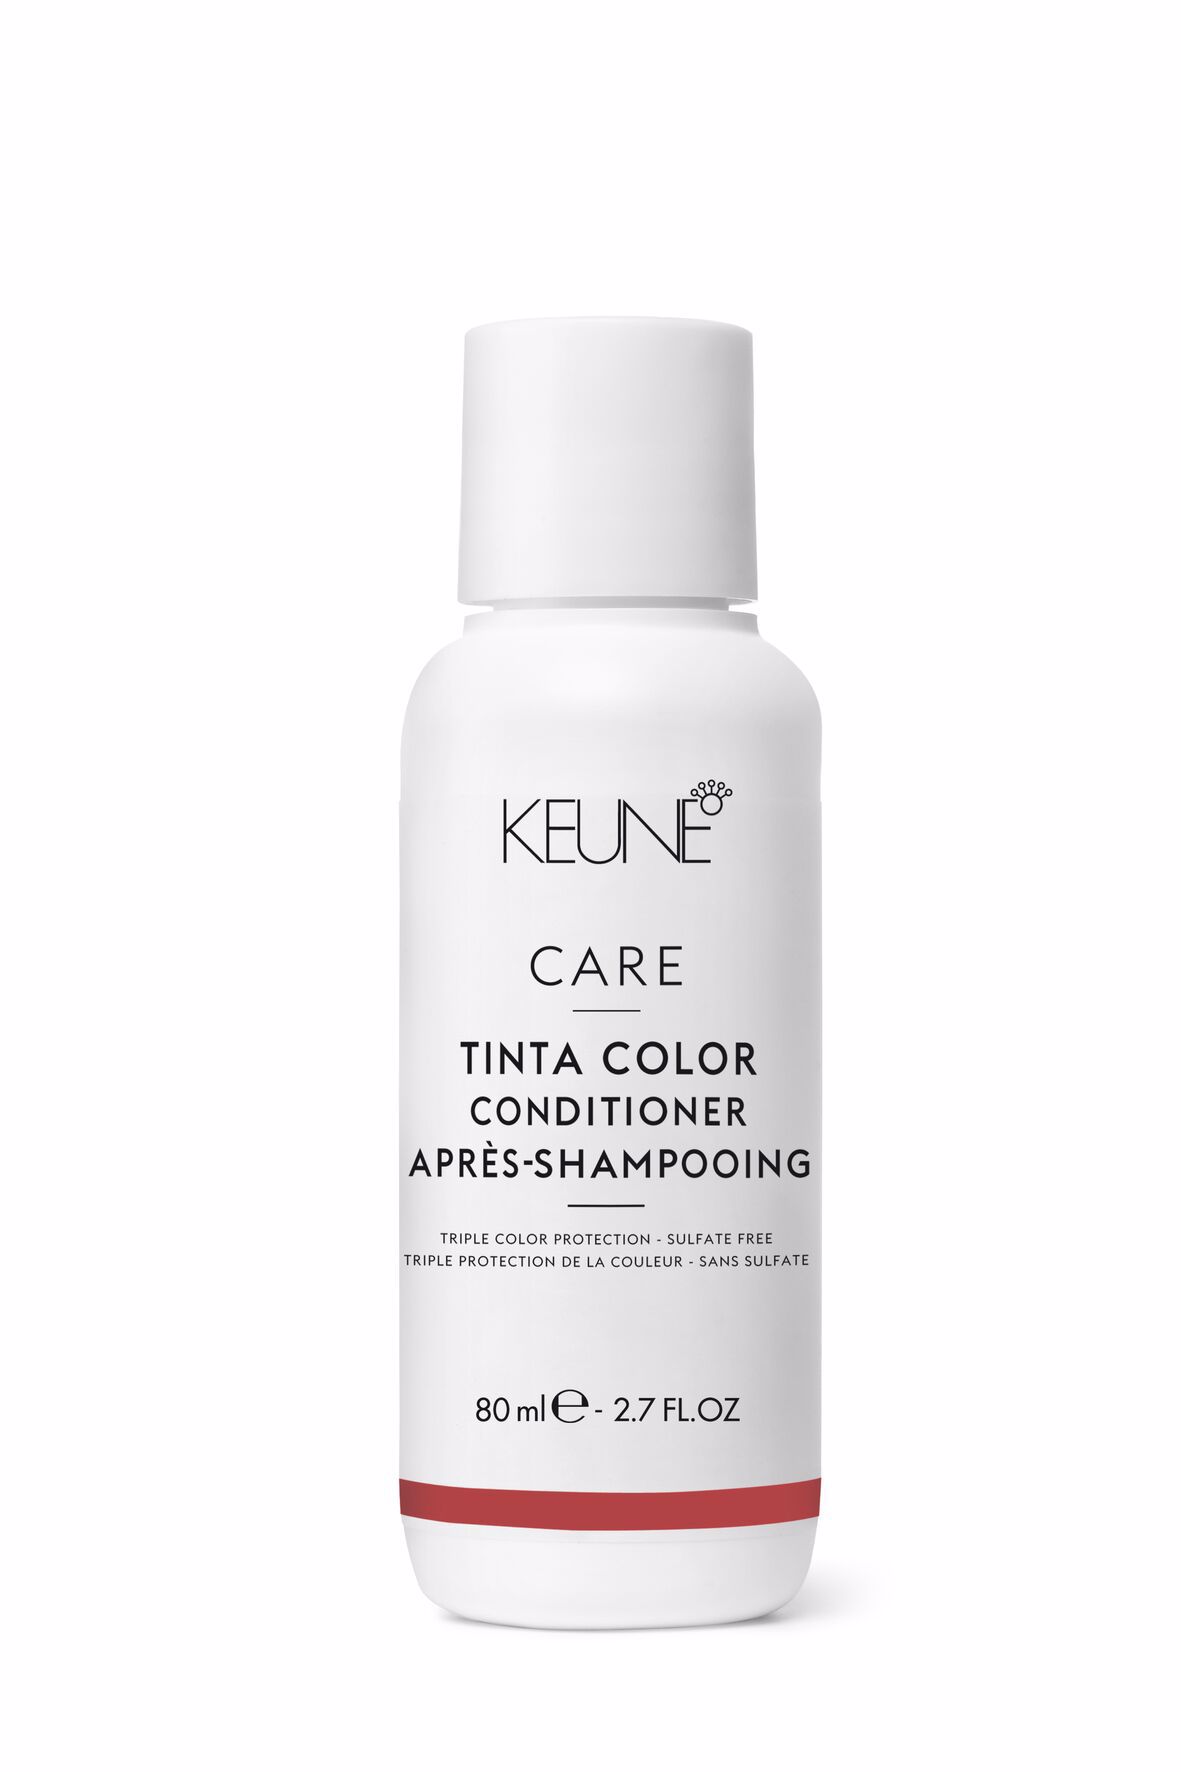 For long-lasting color brilliance, discover Care Tinta Color Conditioner, the hair care product that nourishes and revitalizes, prevents fading, and is gluten-free. Available now on keune.ch.